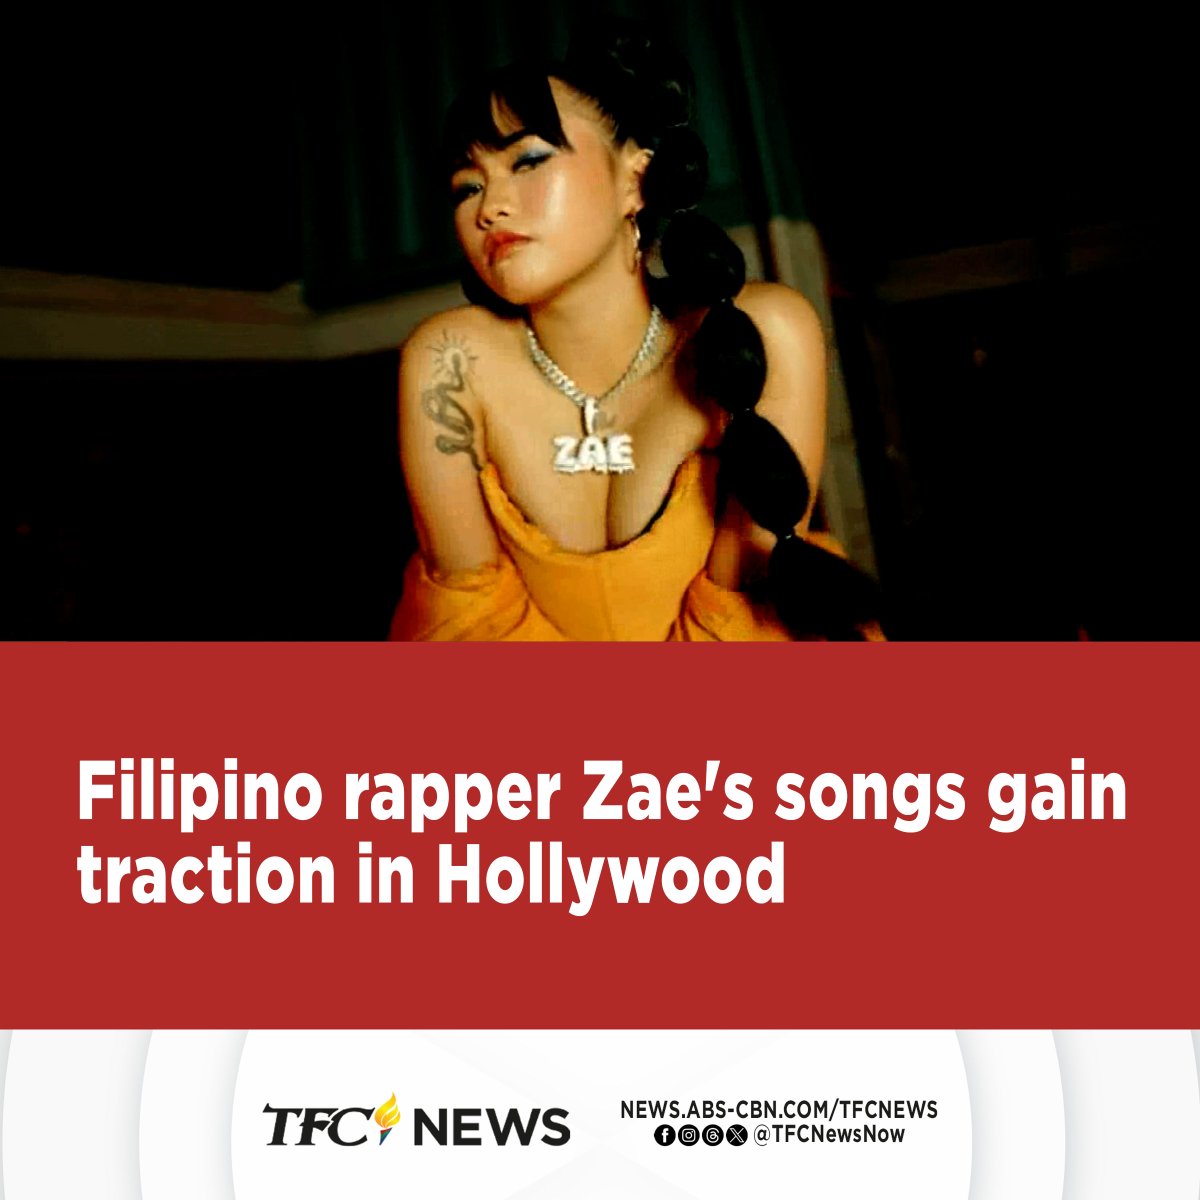 Zae Zacarias is passionate about Filipina empowerment and it shows in her art. Her songs, which she independently released online, have caught the attention of Hollywood music supervisors. Hollywood correspondent @YongChavezLA tells us more. youtu.be/SQUvaY_xE4g